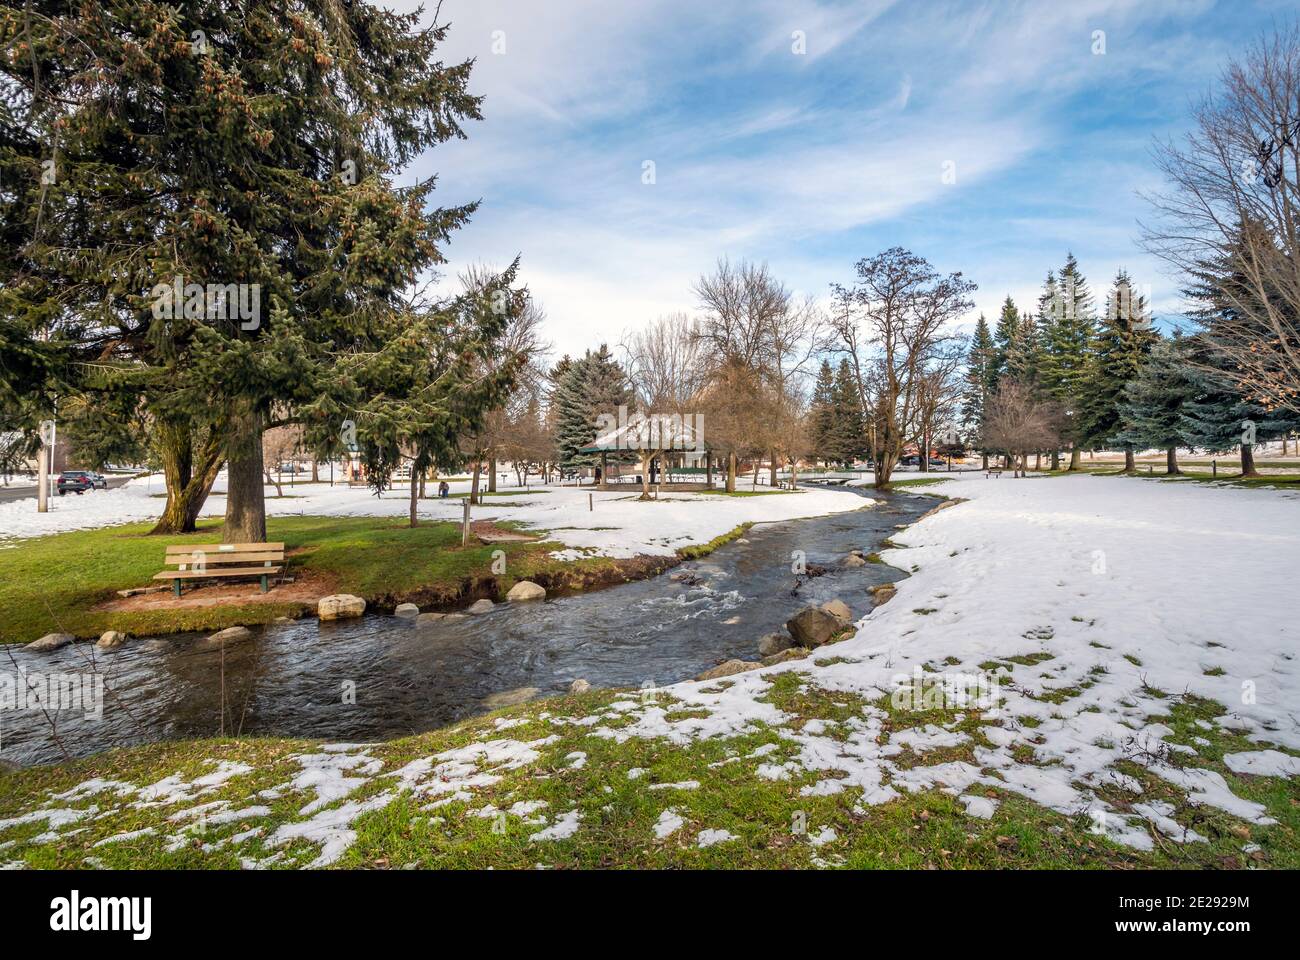 A small creek runs through the small public park with snow during winter at Rathdrum, Idaho USA. Stock Photo